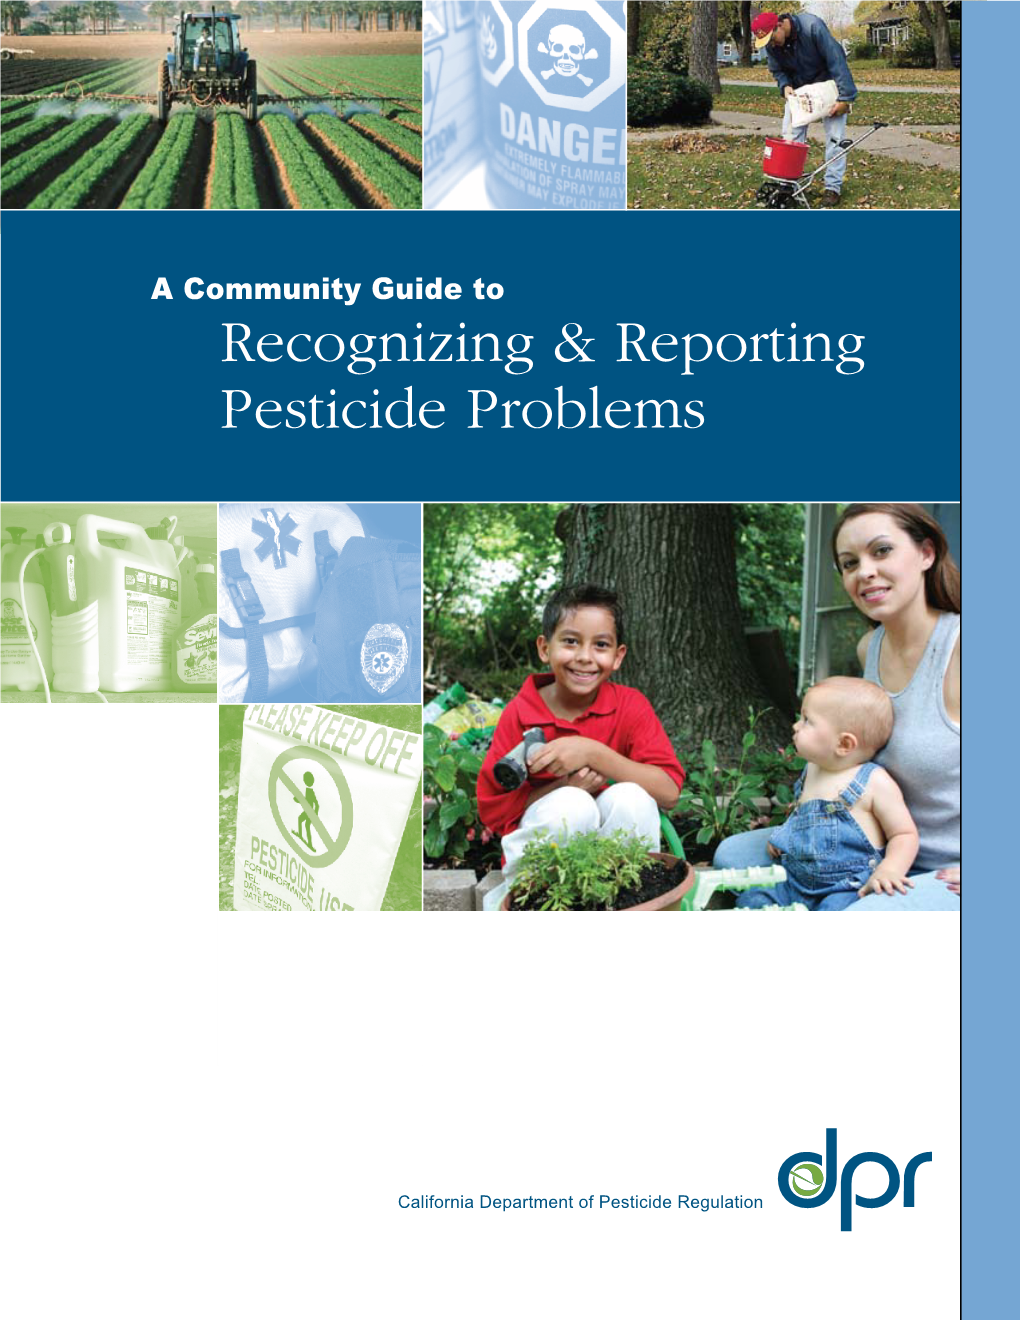 A Community Guide to Recognizing & Reporting Pesticide Problems